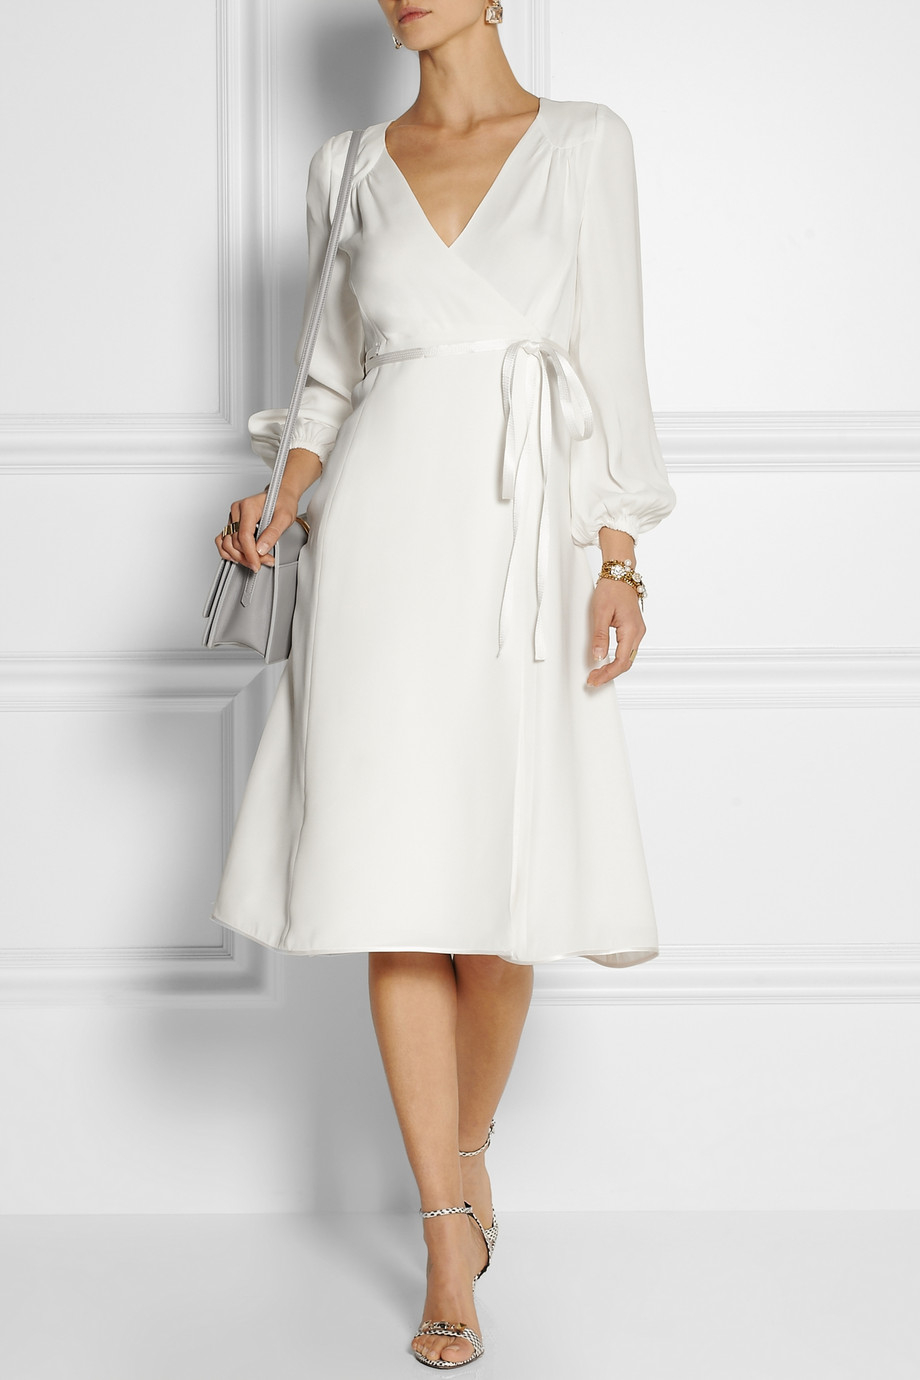 Marc Jacobs Silk Crepe Wrap Dress in White - Lyst